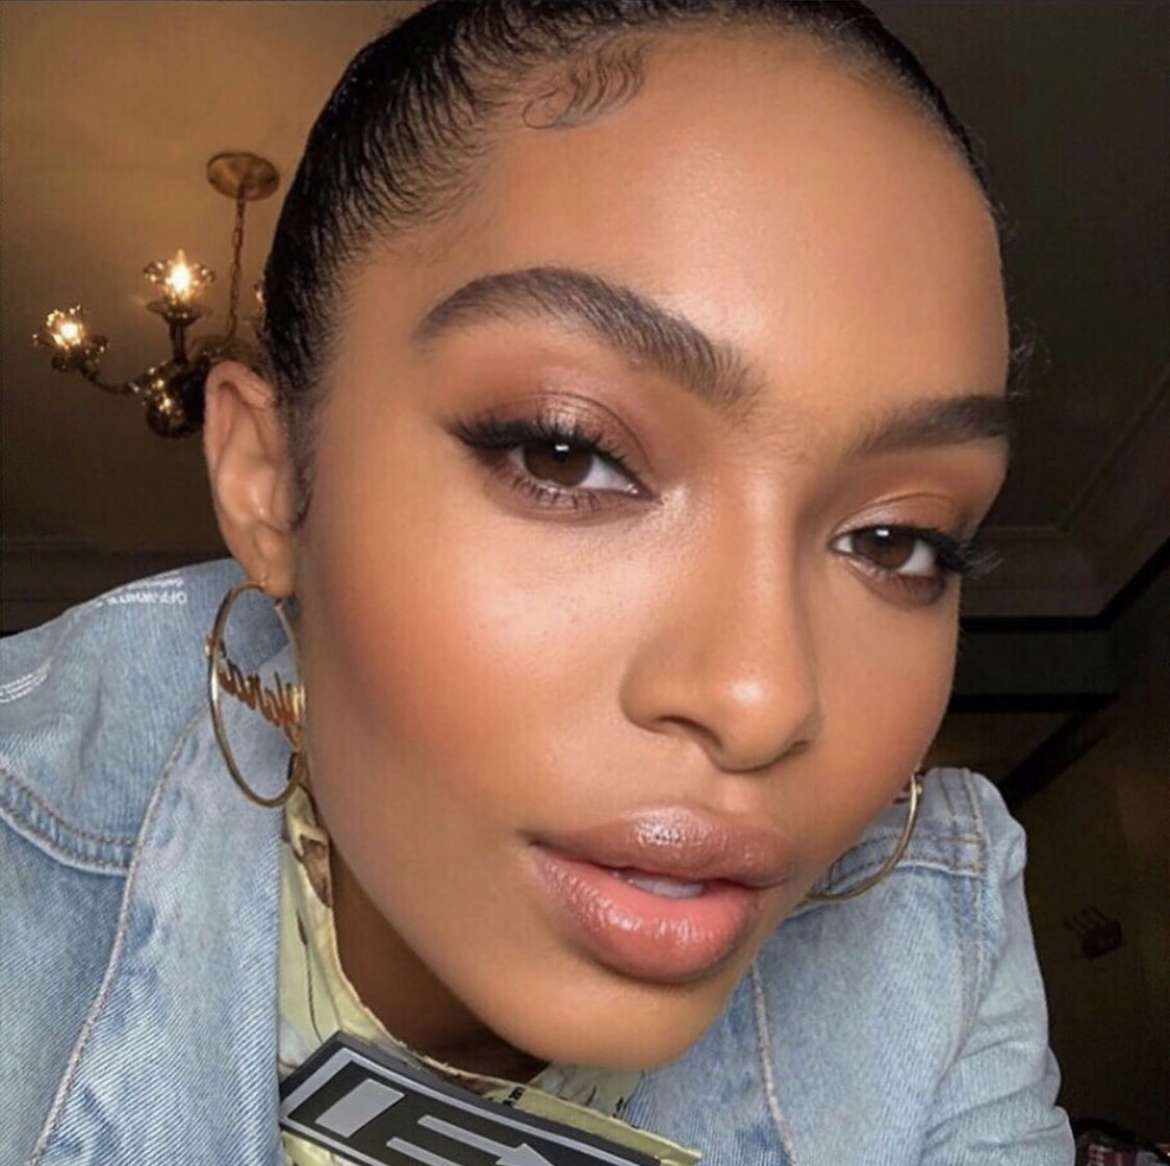 HER SOURCE: The Girls Are All Causing Brow Envy